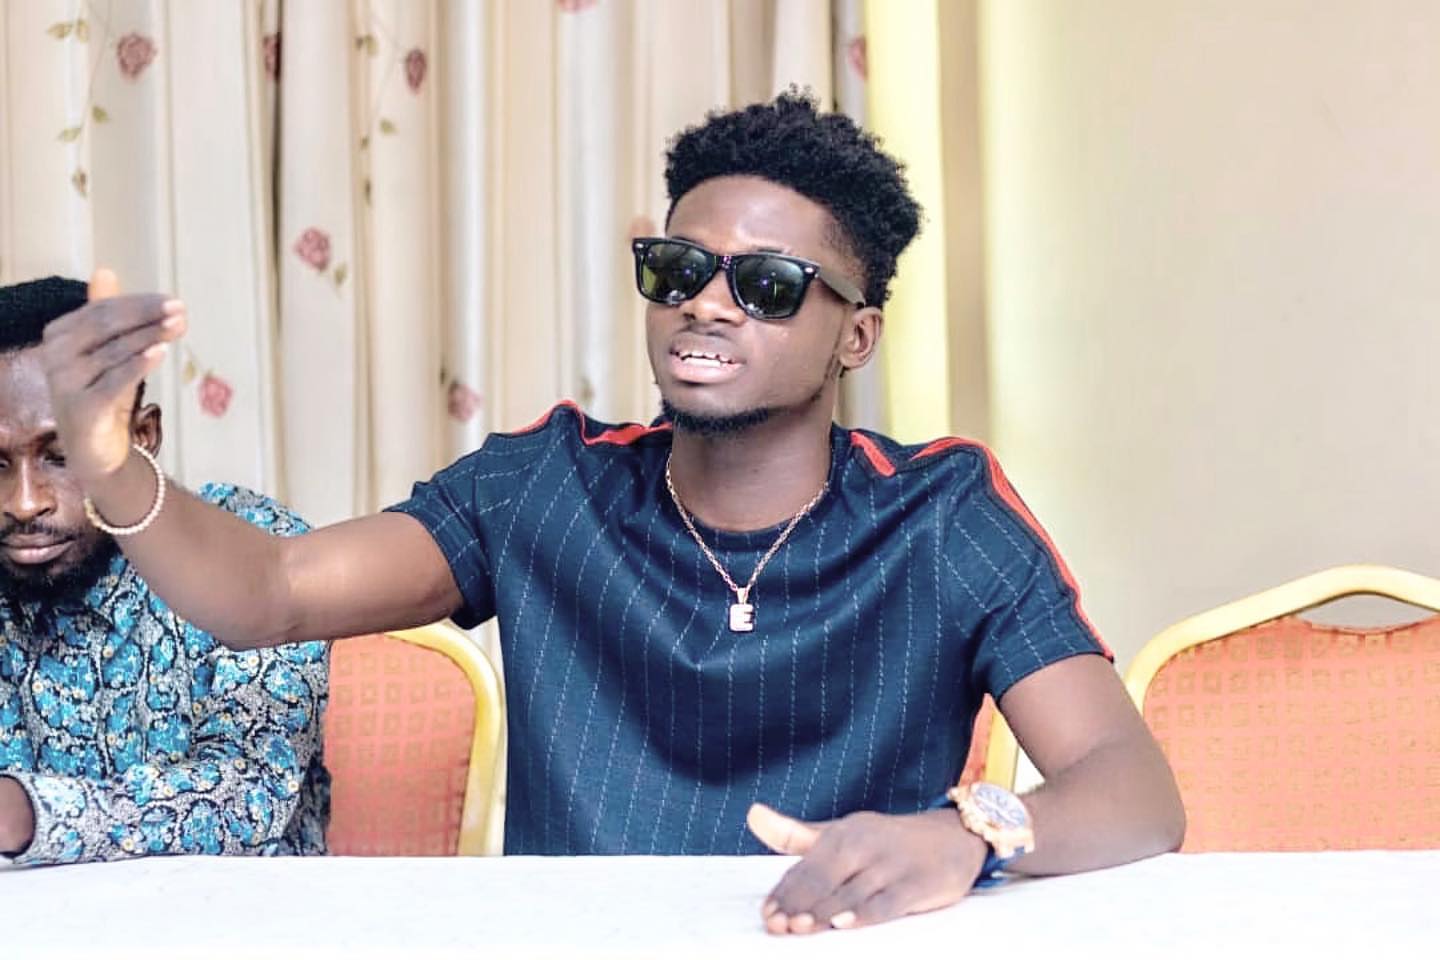 VIDEO: Relax I don’t have a baby – Kuami Eugene tells ‘angry’ fans